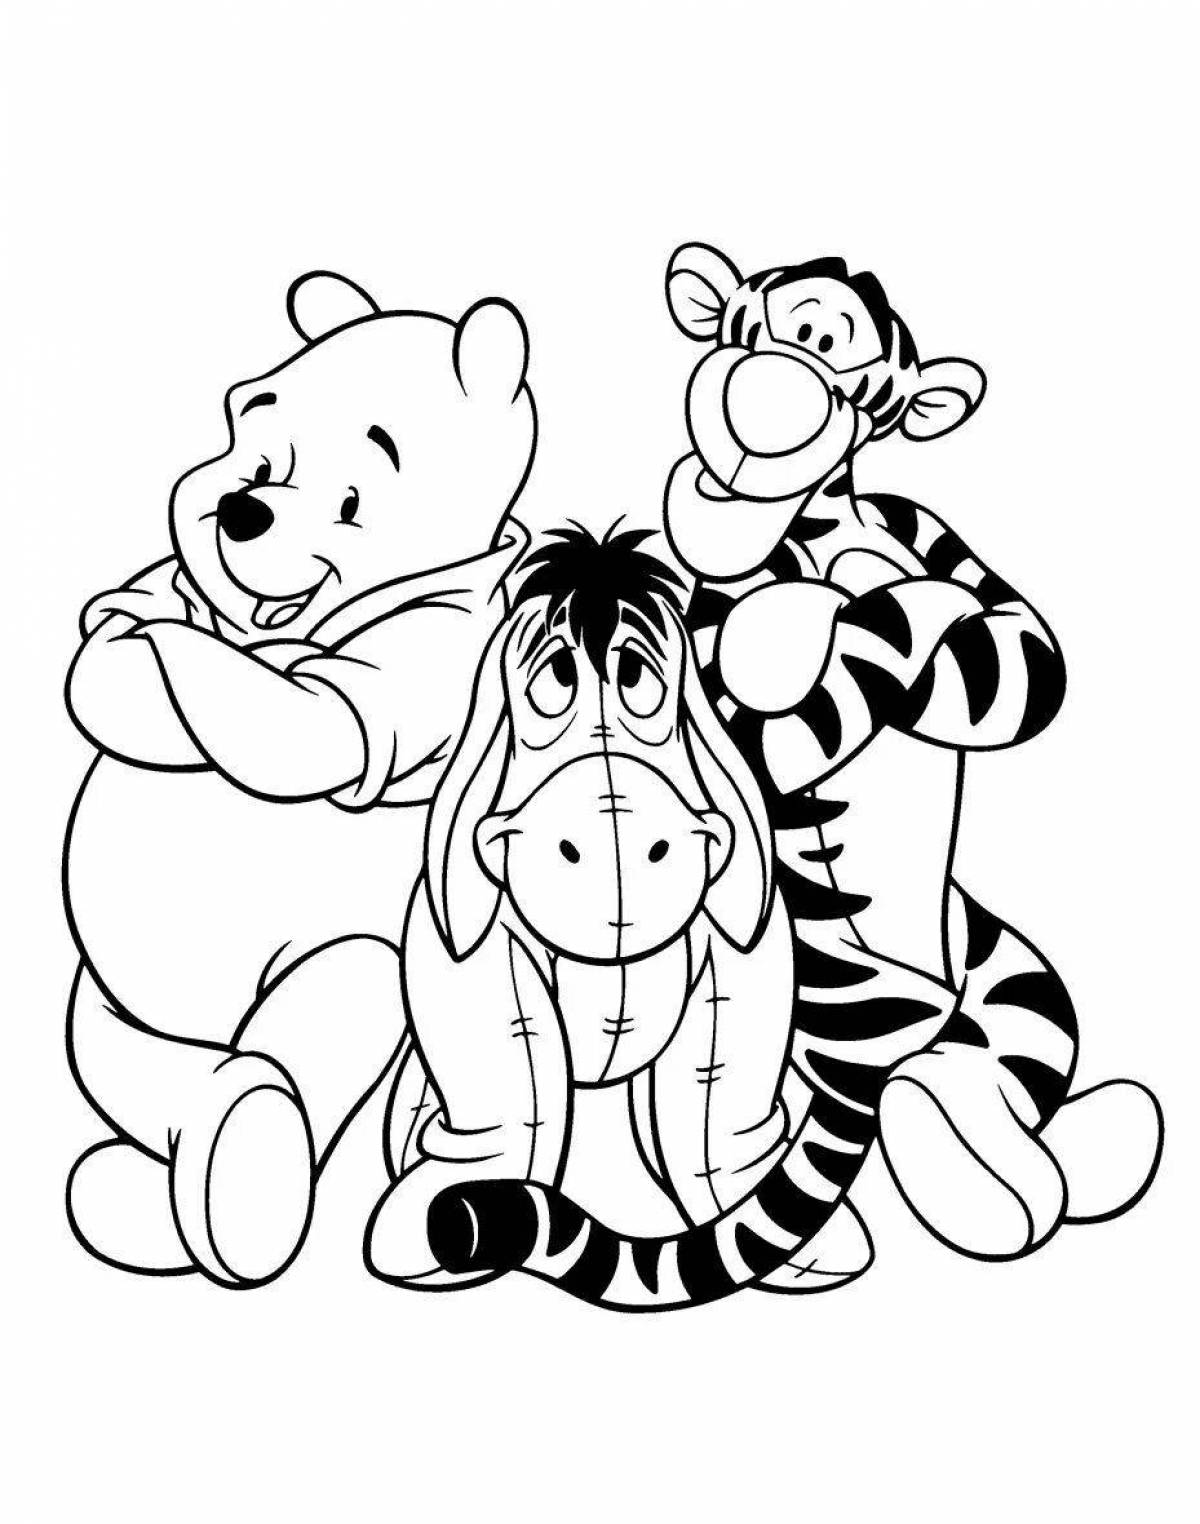 Playtime coloring page winnie the pooh for kids